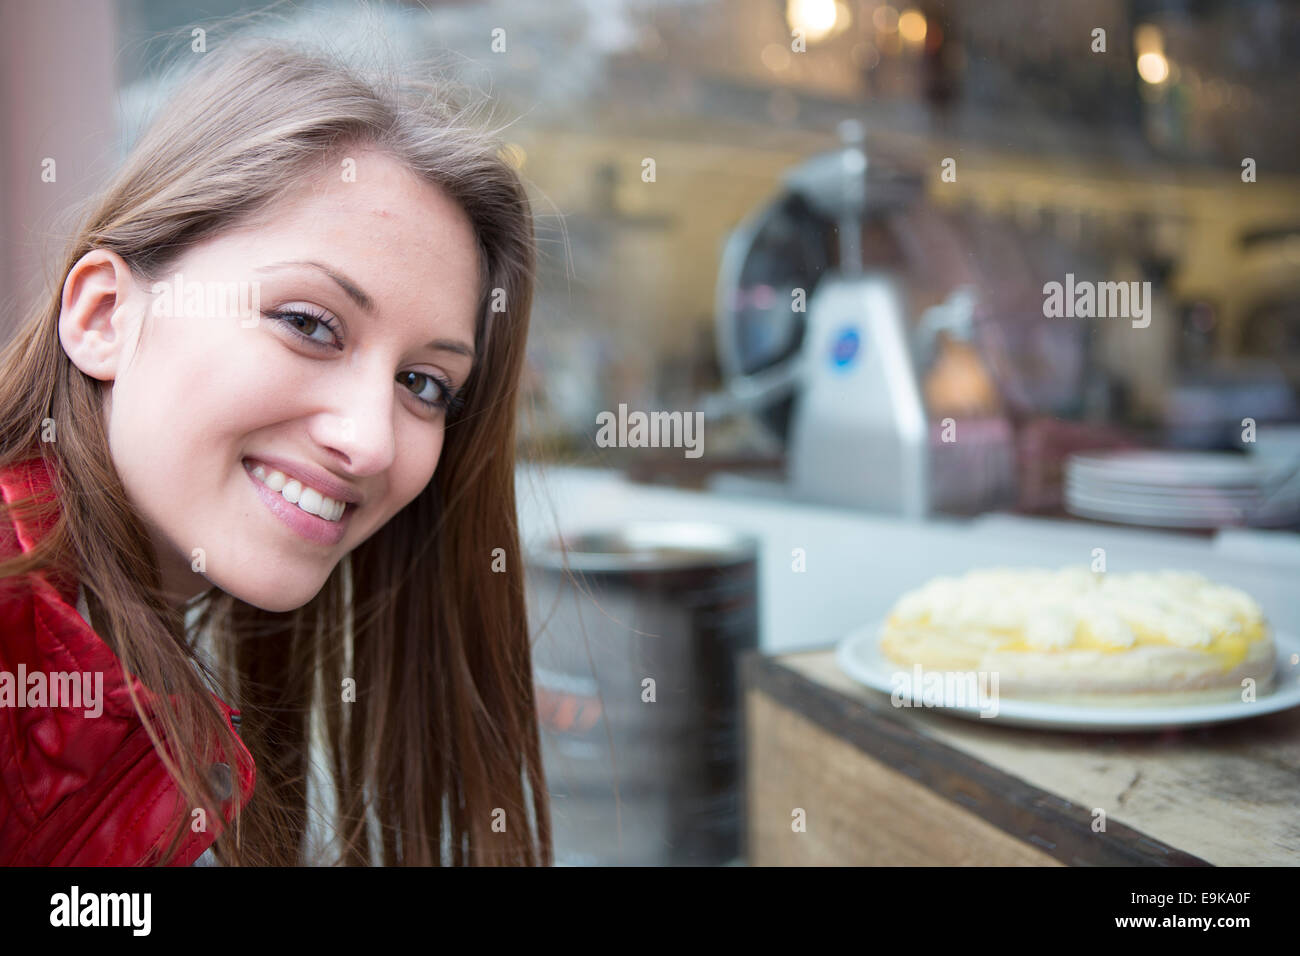 Portrait of happy woman by display cabinet in cafe Stock Photo